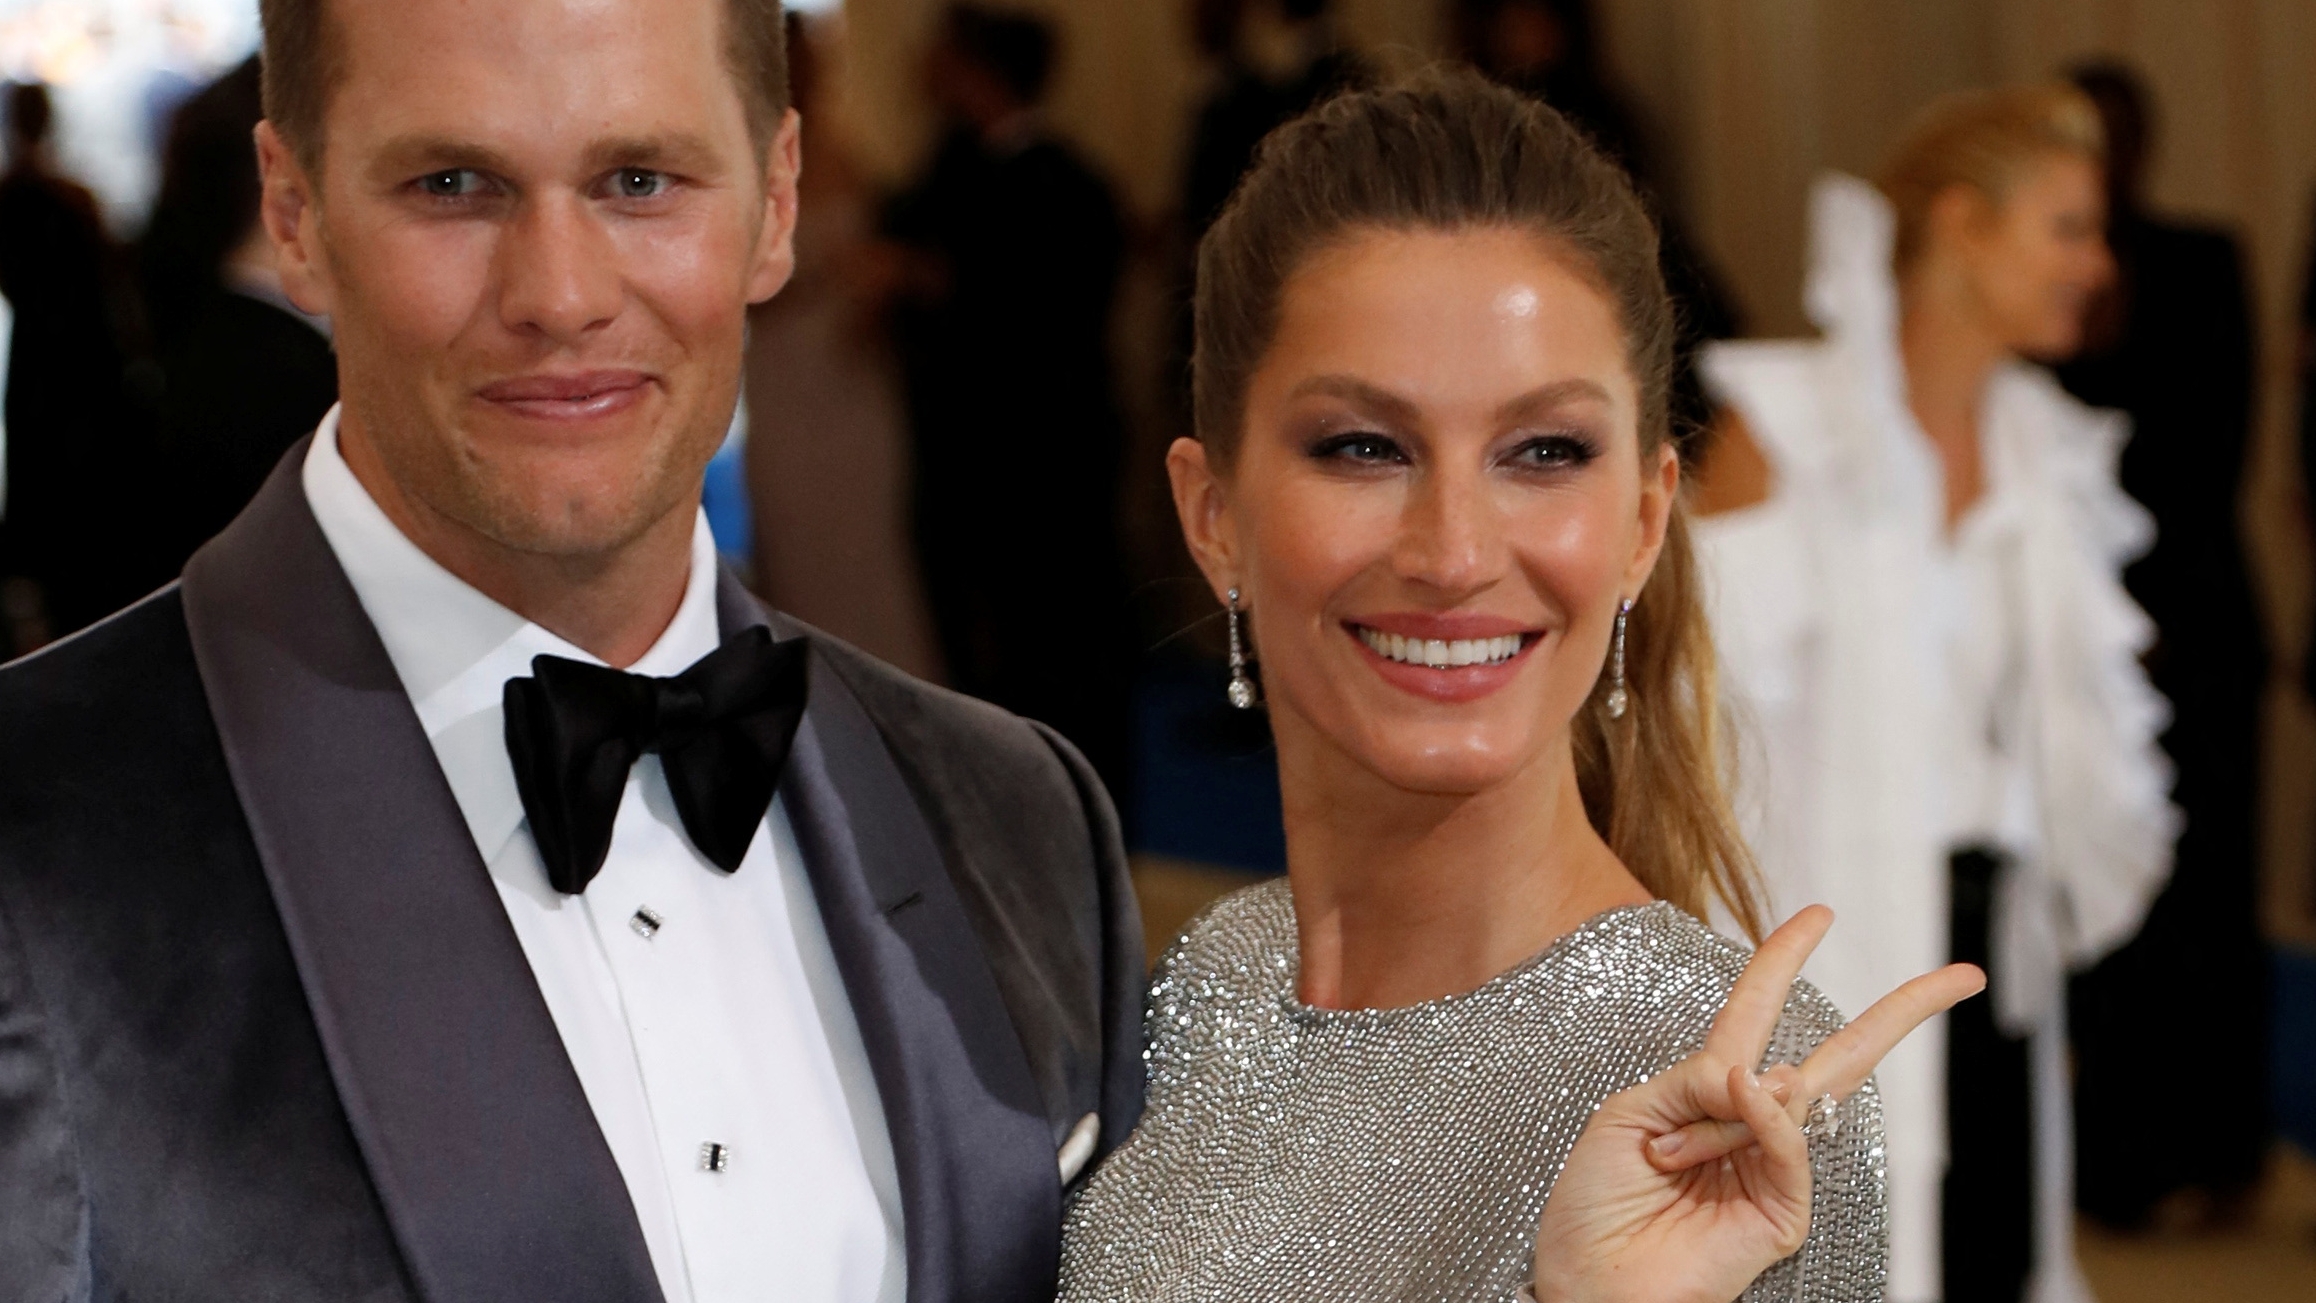 Gisele Bündchen and Tom Brady announced their divorce on social media on October 28 (Reuters)